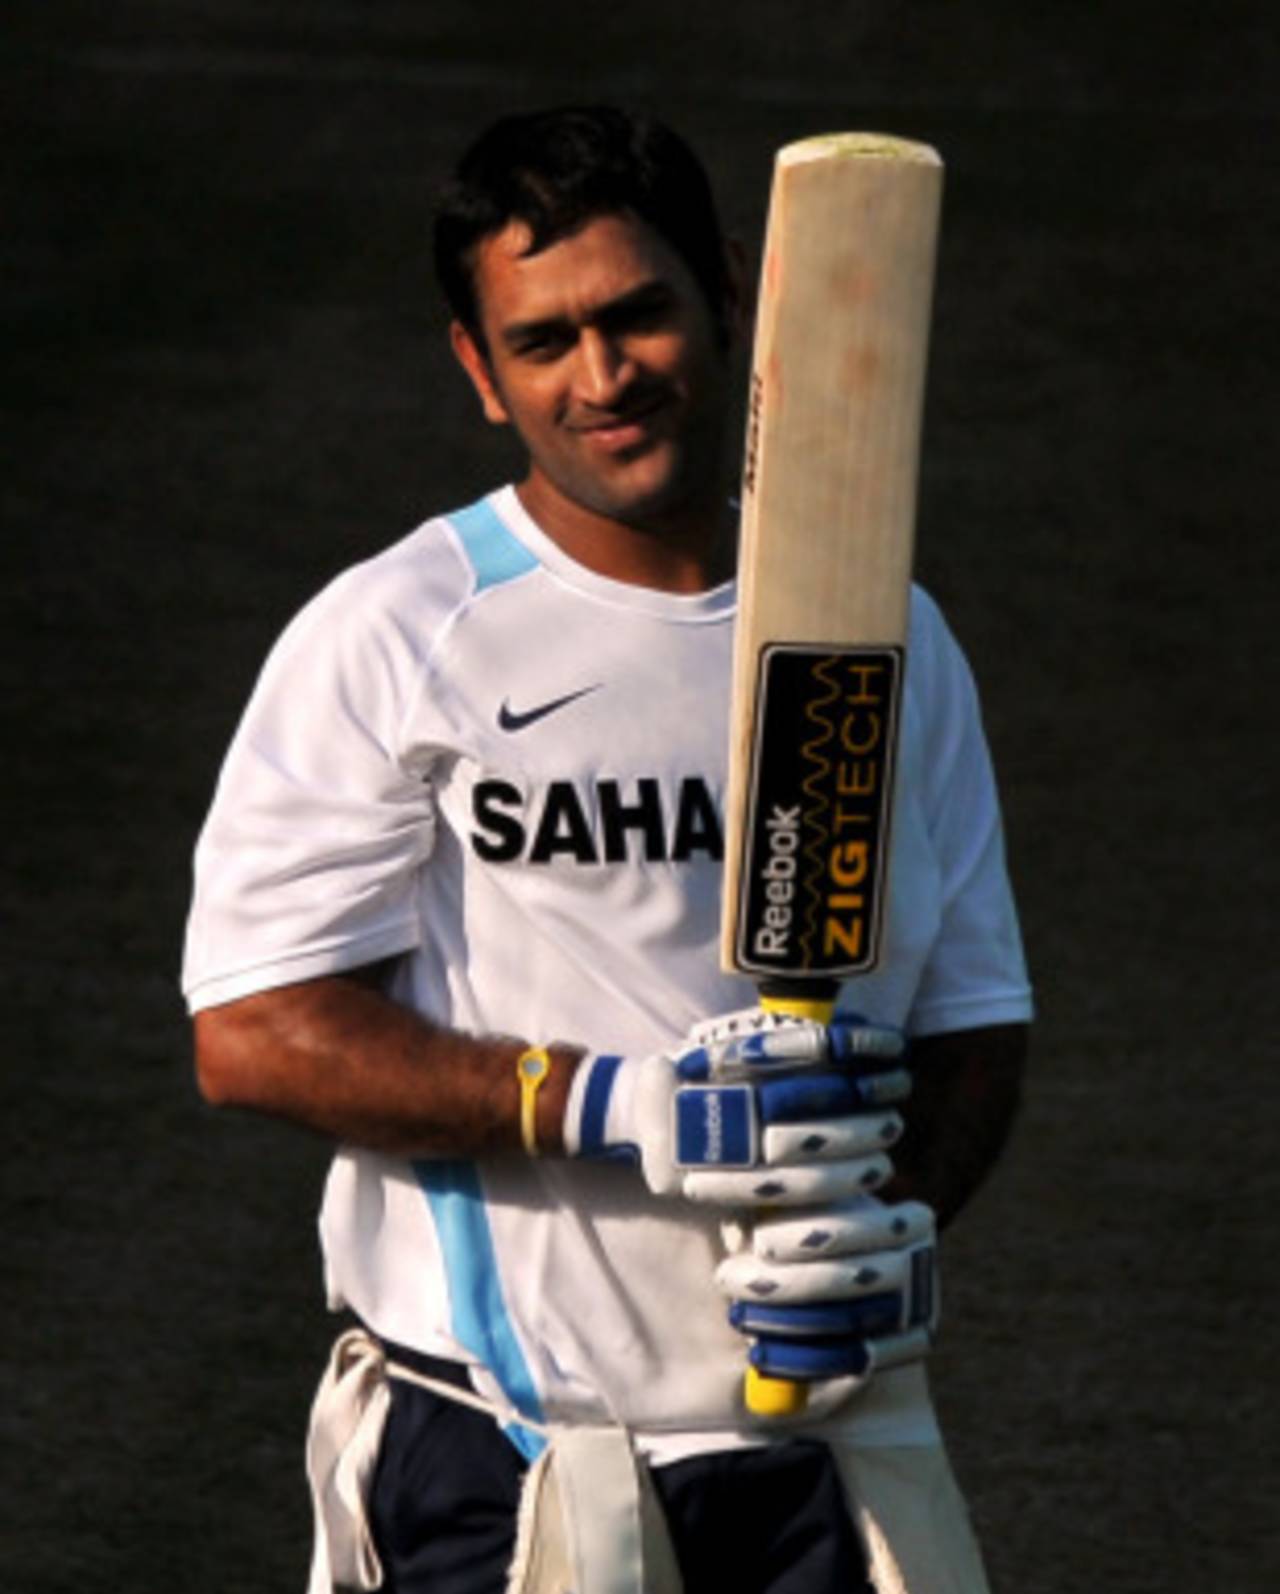 MS Dhoni finds something to smile about, Mohali, September 29, 2010